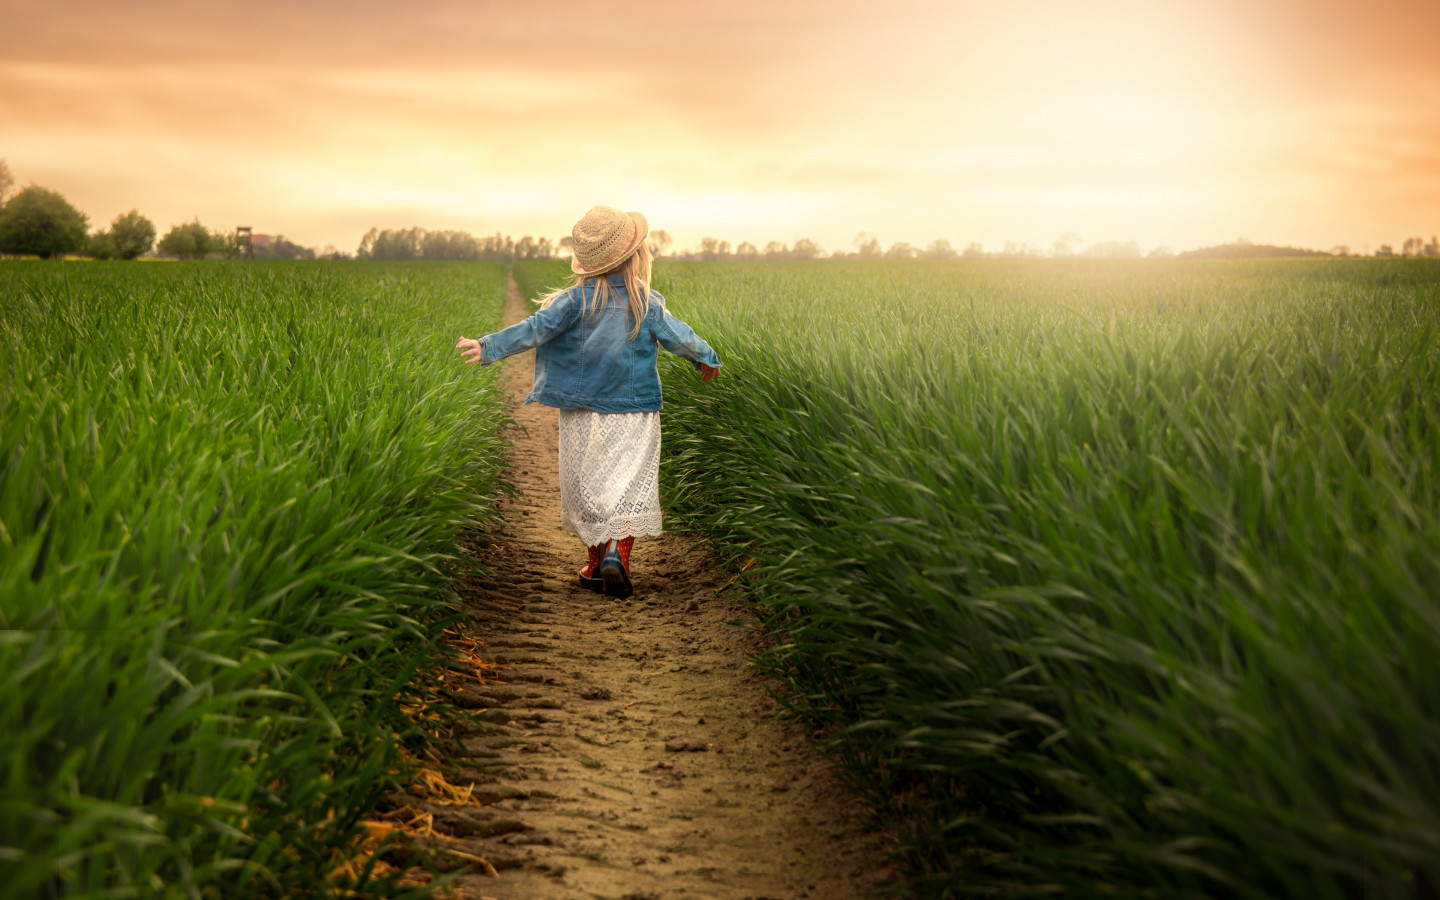 Child in the green field at sunset wallpaper 1440x900